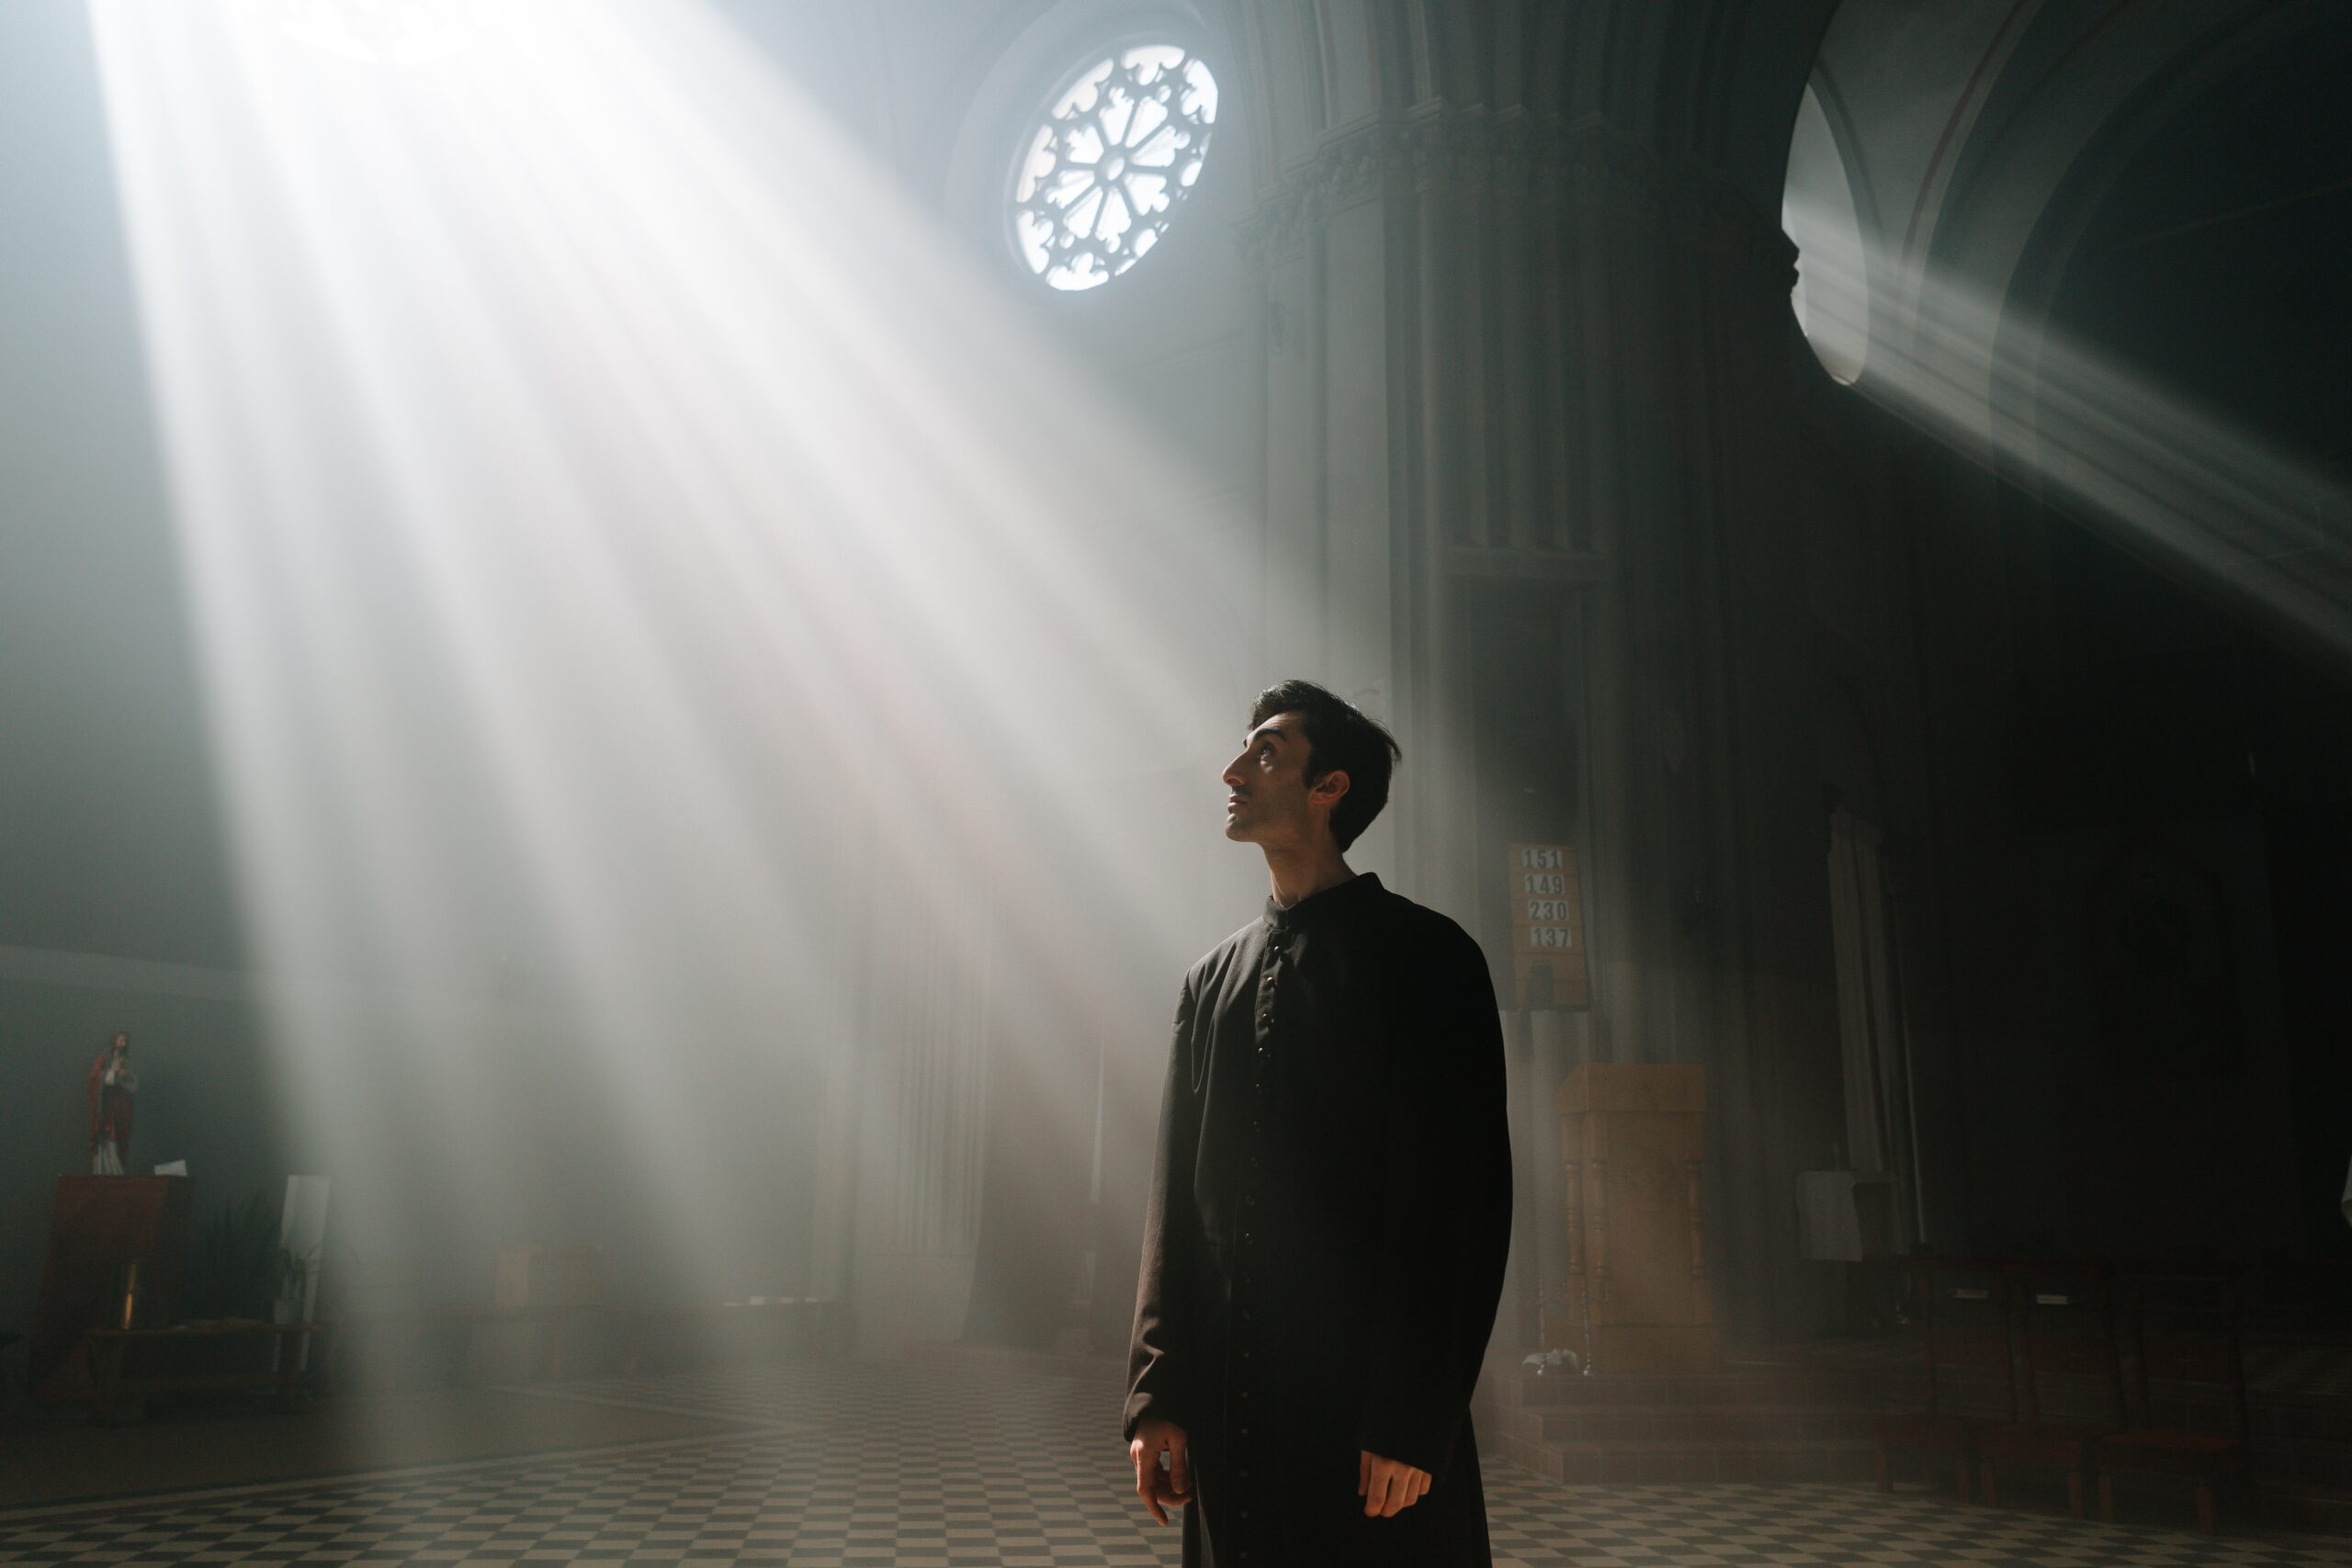 A man engulfed in a ray of bright light floading from the ceiling of a church building